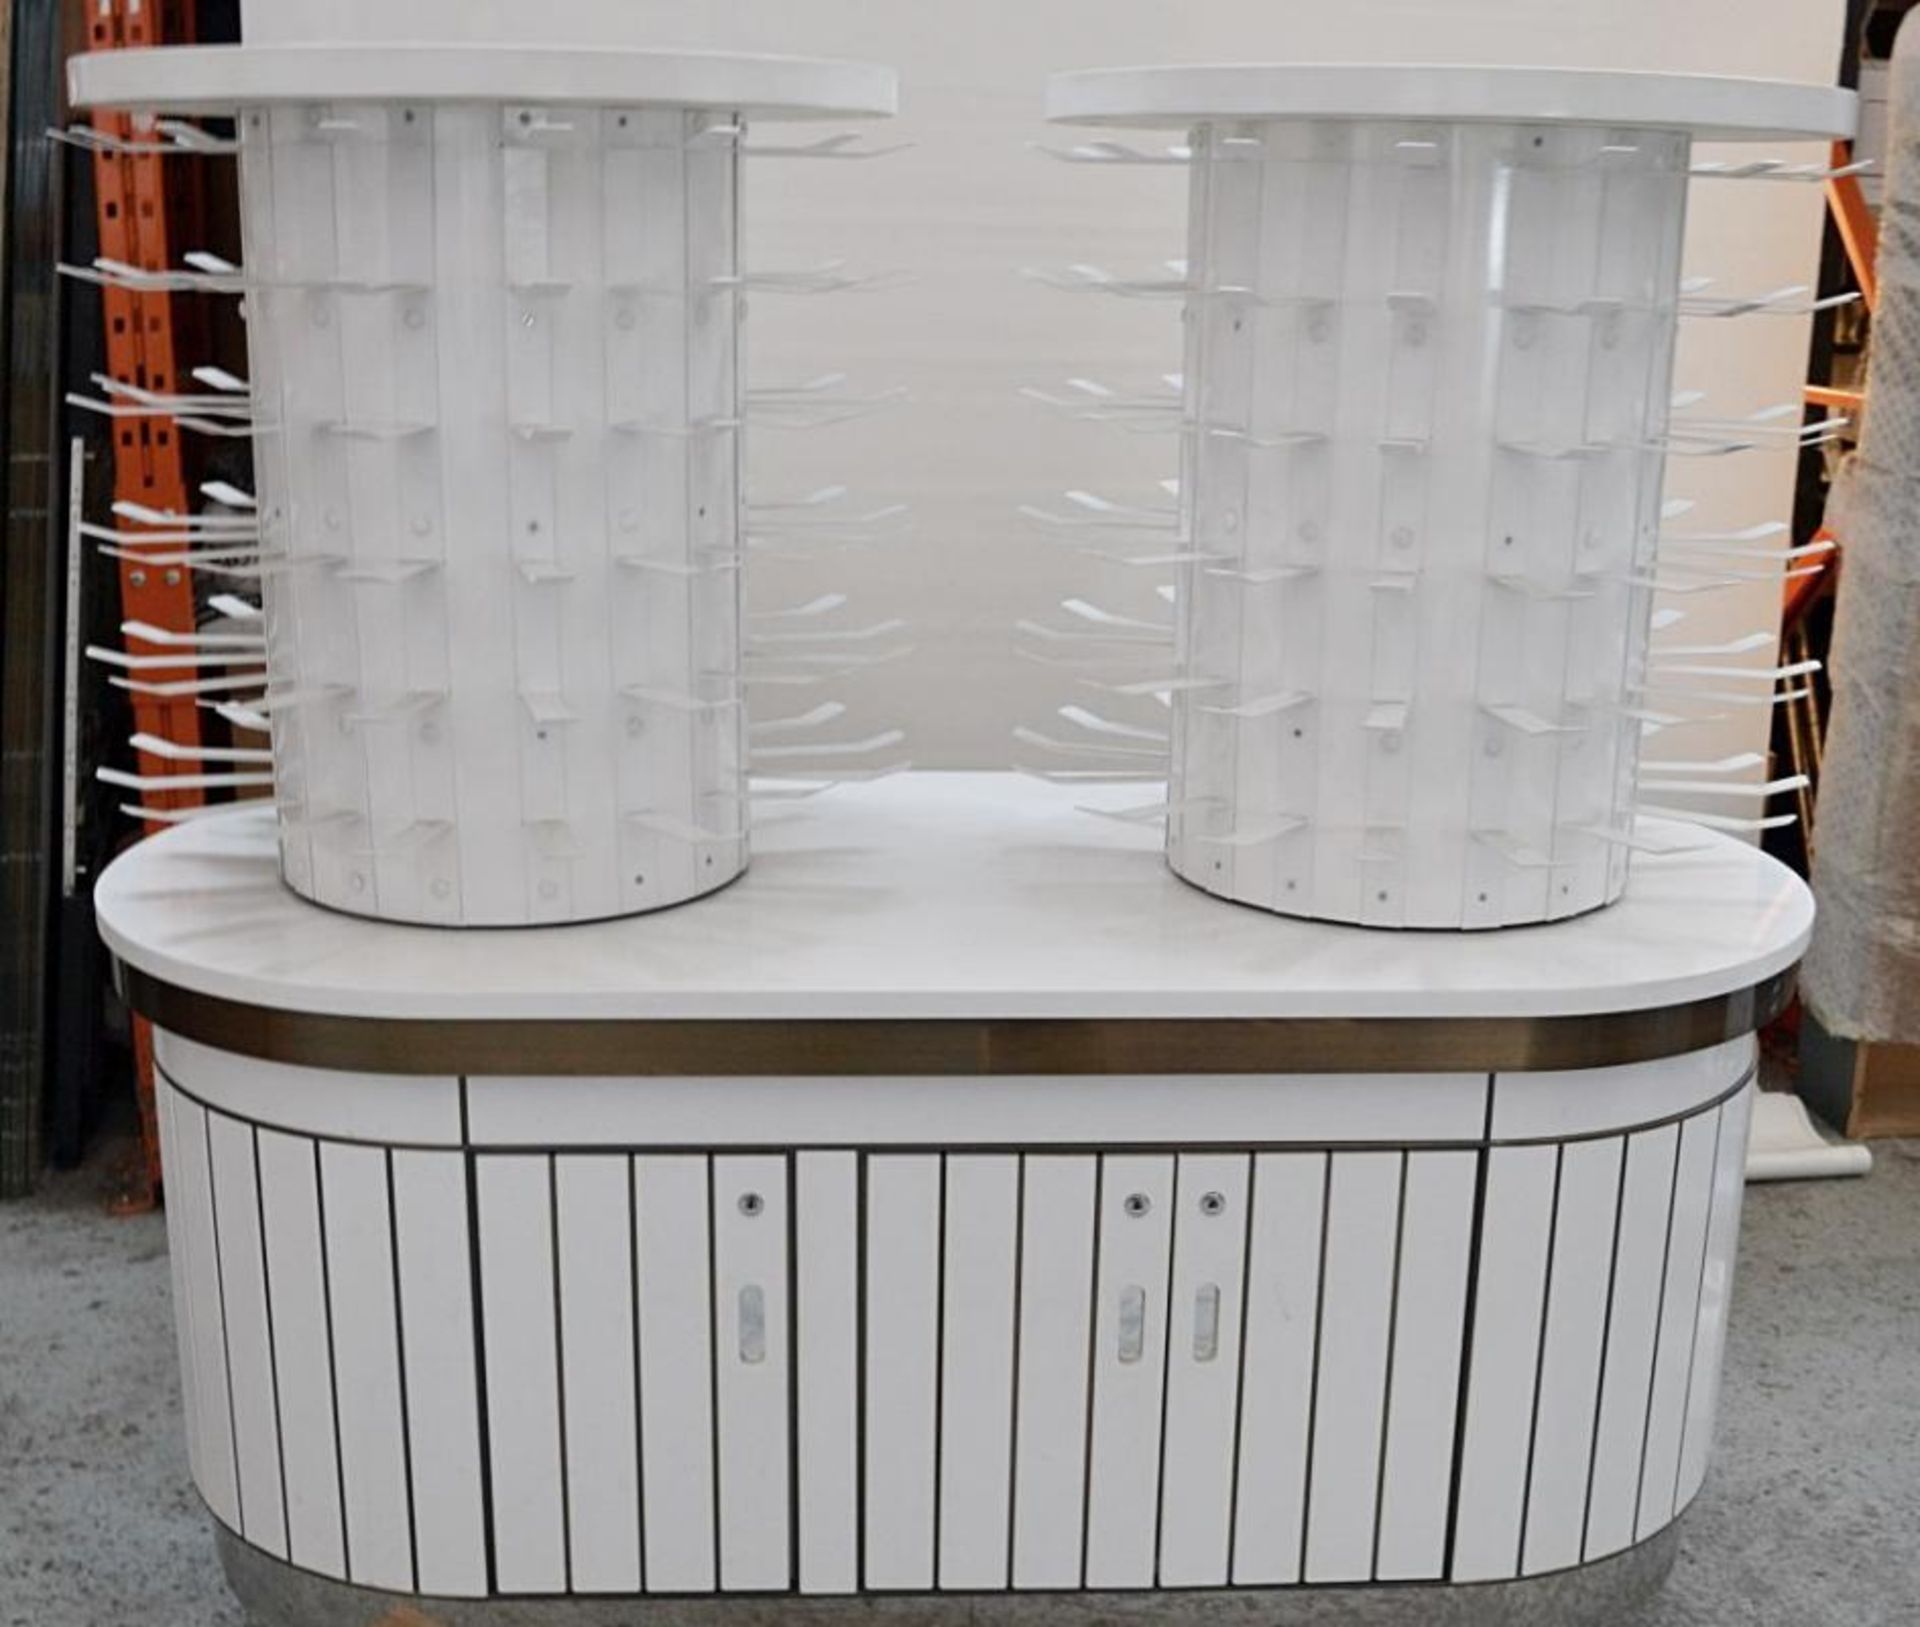 A Pair Of Curved Cosmetics Shop Counters With Revolving Carousels In White - Recently Removed From H